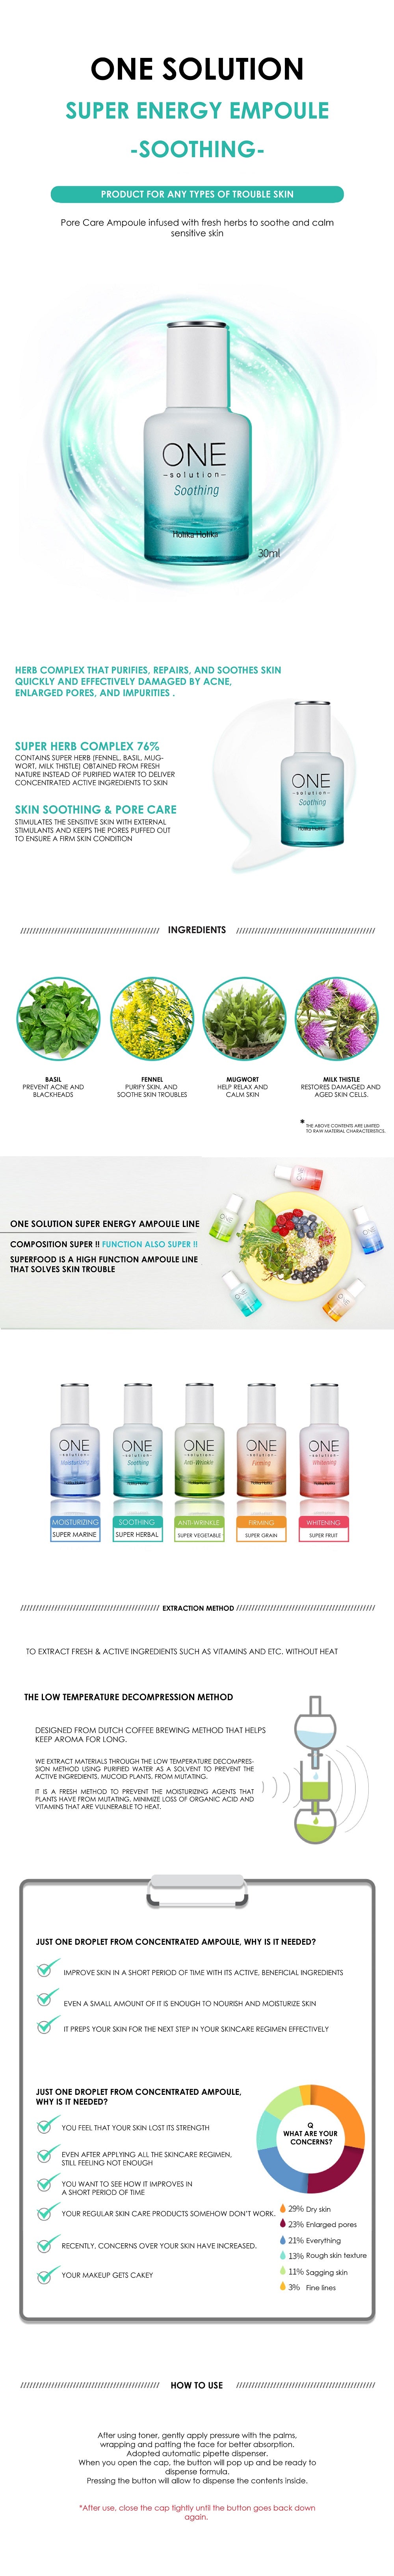 Ampoule Soothing | One Solution Super Energy Ampoule Soothing